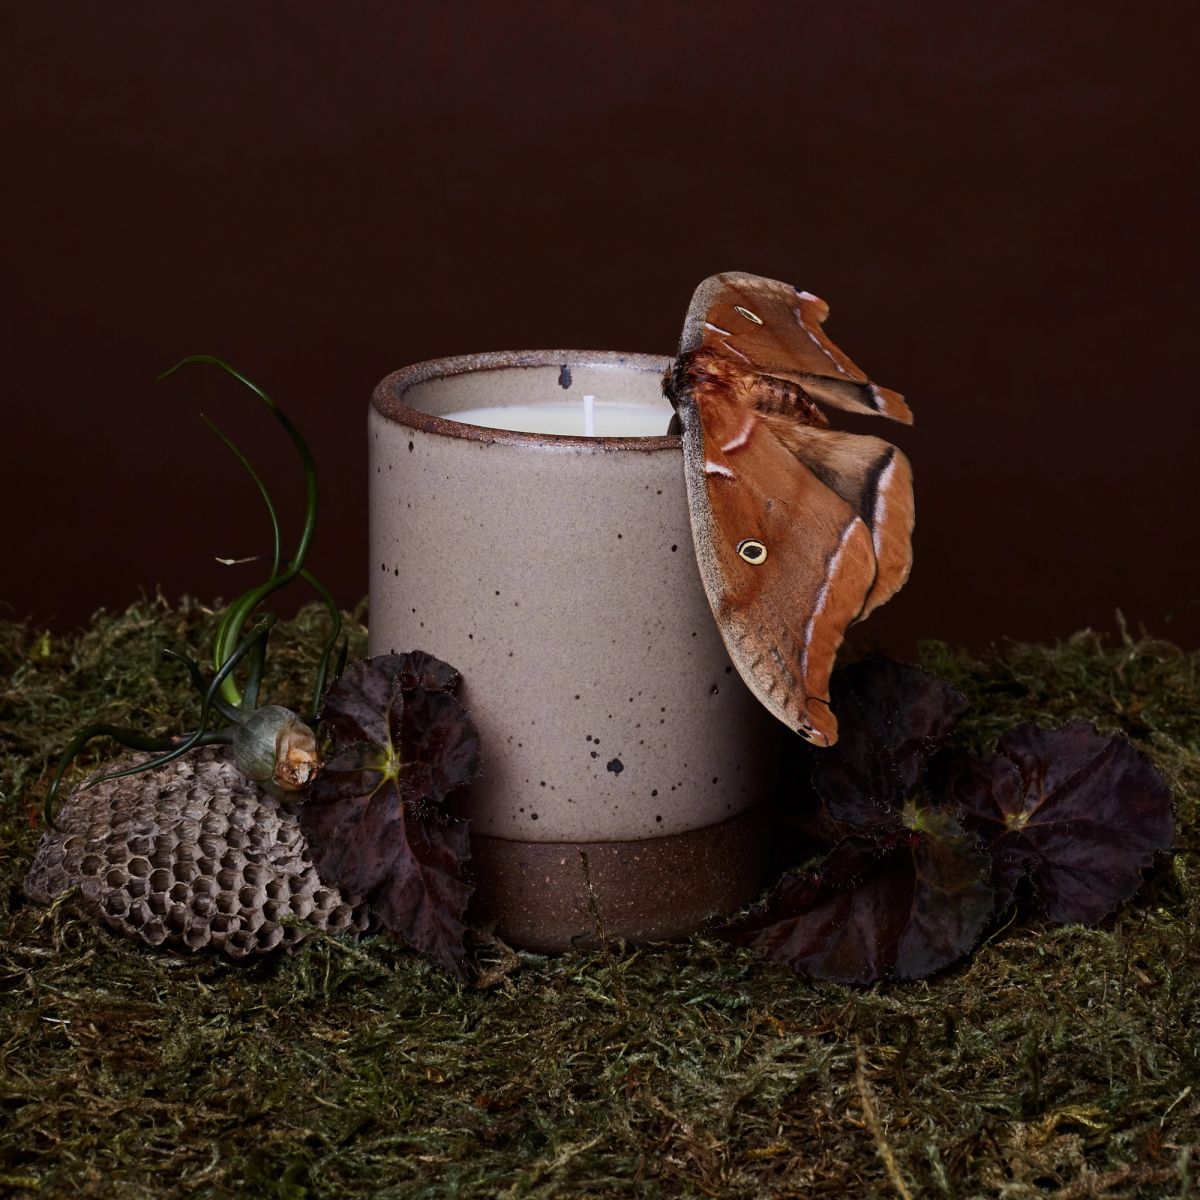 A ceramic muted tan vessel with a candle inside. It is sitting on a bed of moss and surrounded by little pieces of nature like a dried leaf and a moth.